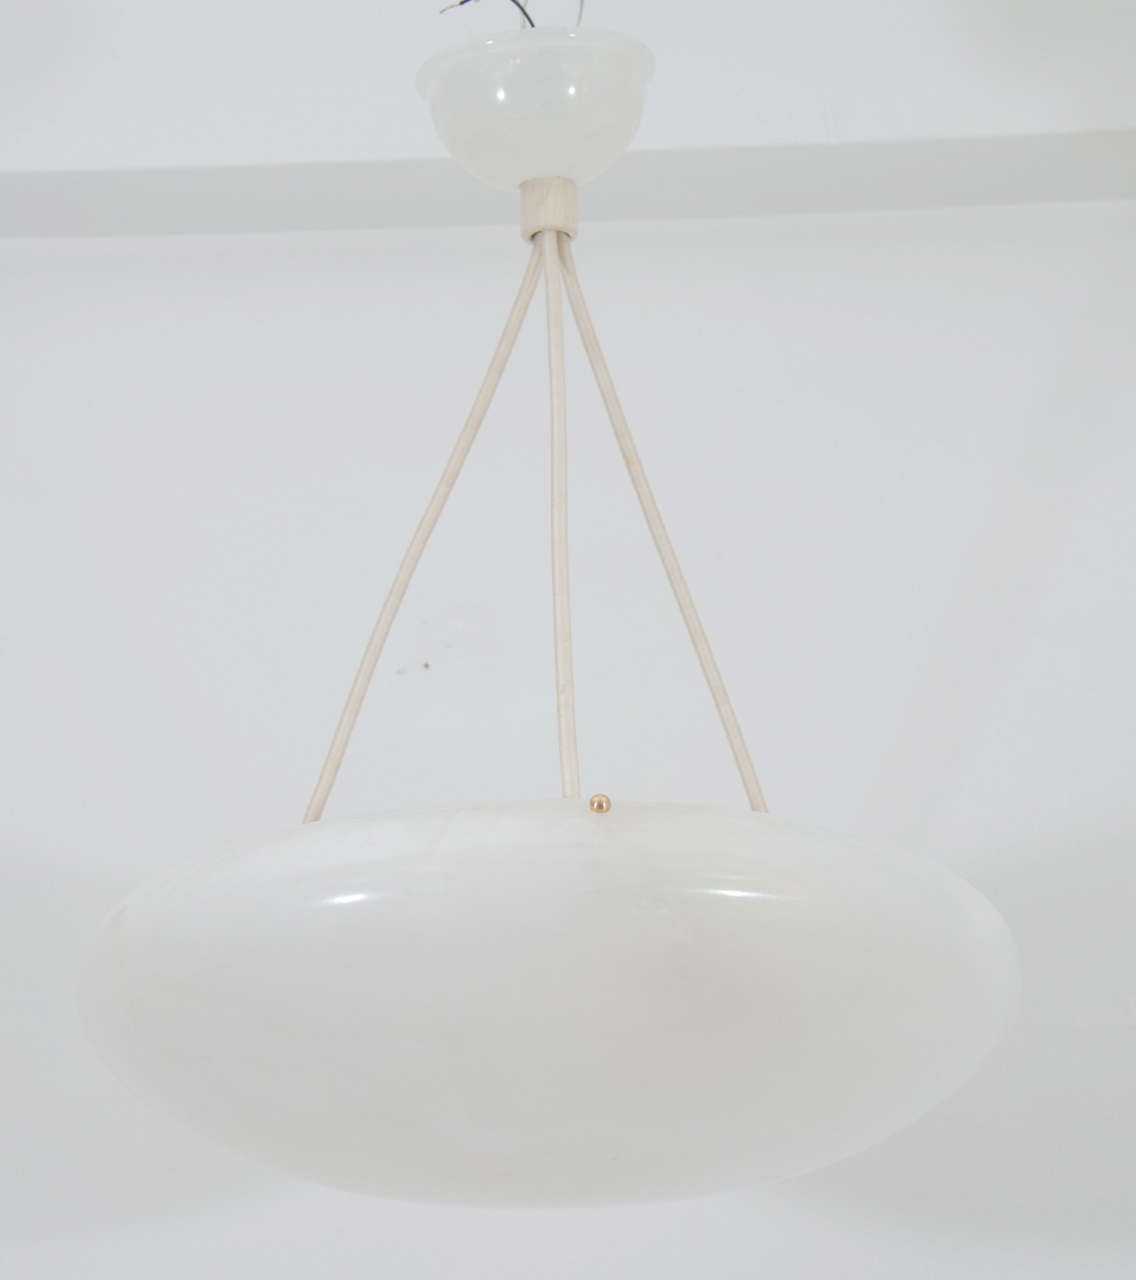 Pure white and radiant, this oblate spheroid is suspended on a set of three electrified ropes, holding three 60 watt bulbs, or LED equivalents.

Custom rewiring to your specified drop is included in purchase price.

Available to view in our